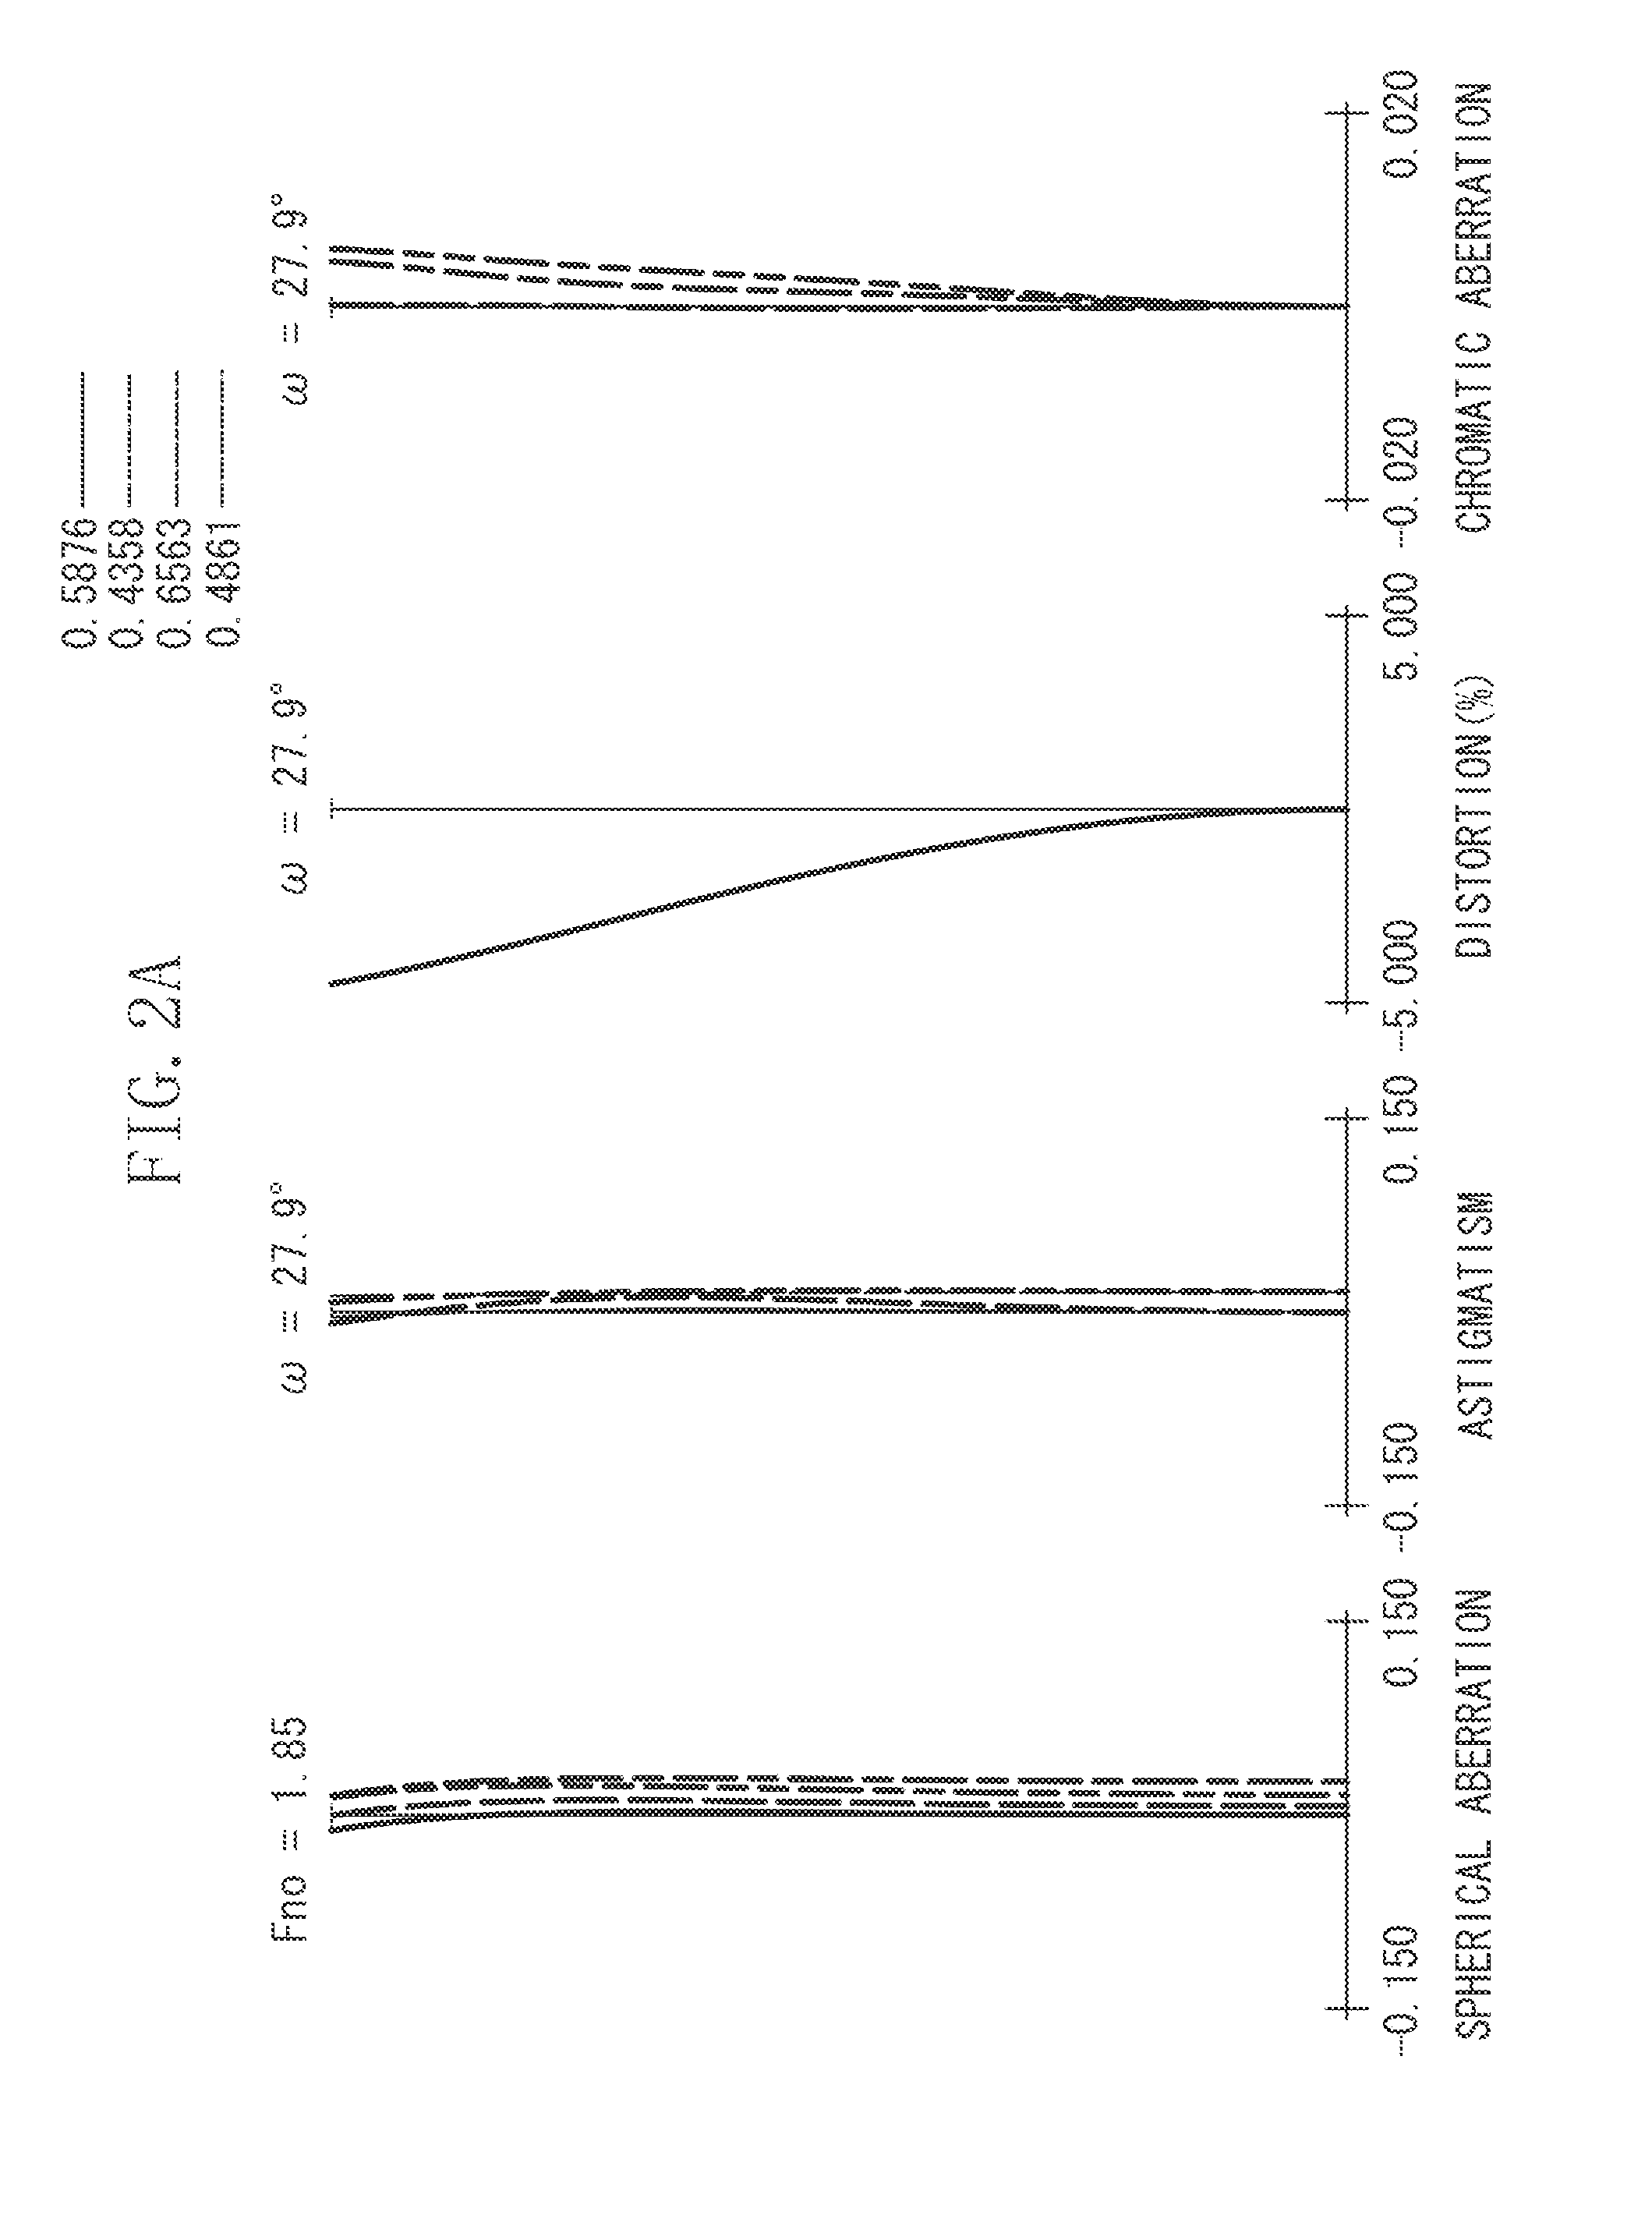 Zoom lens and image pickup apparatus having the zoom lens